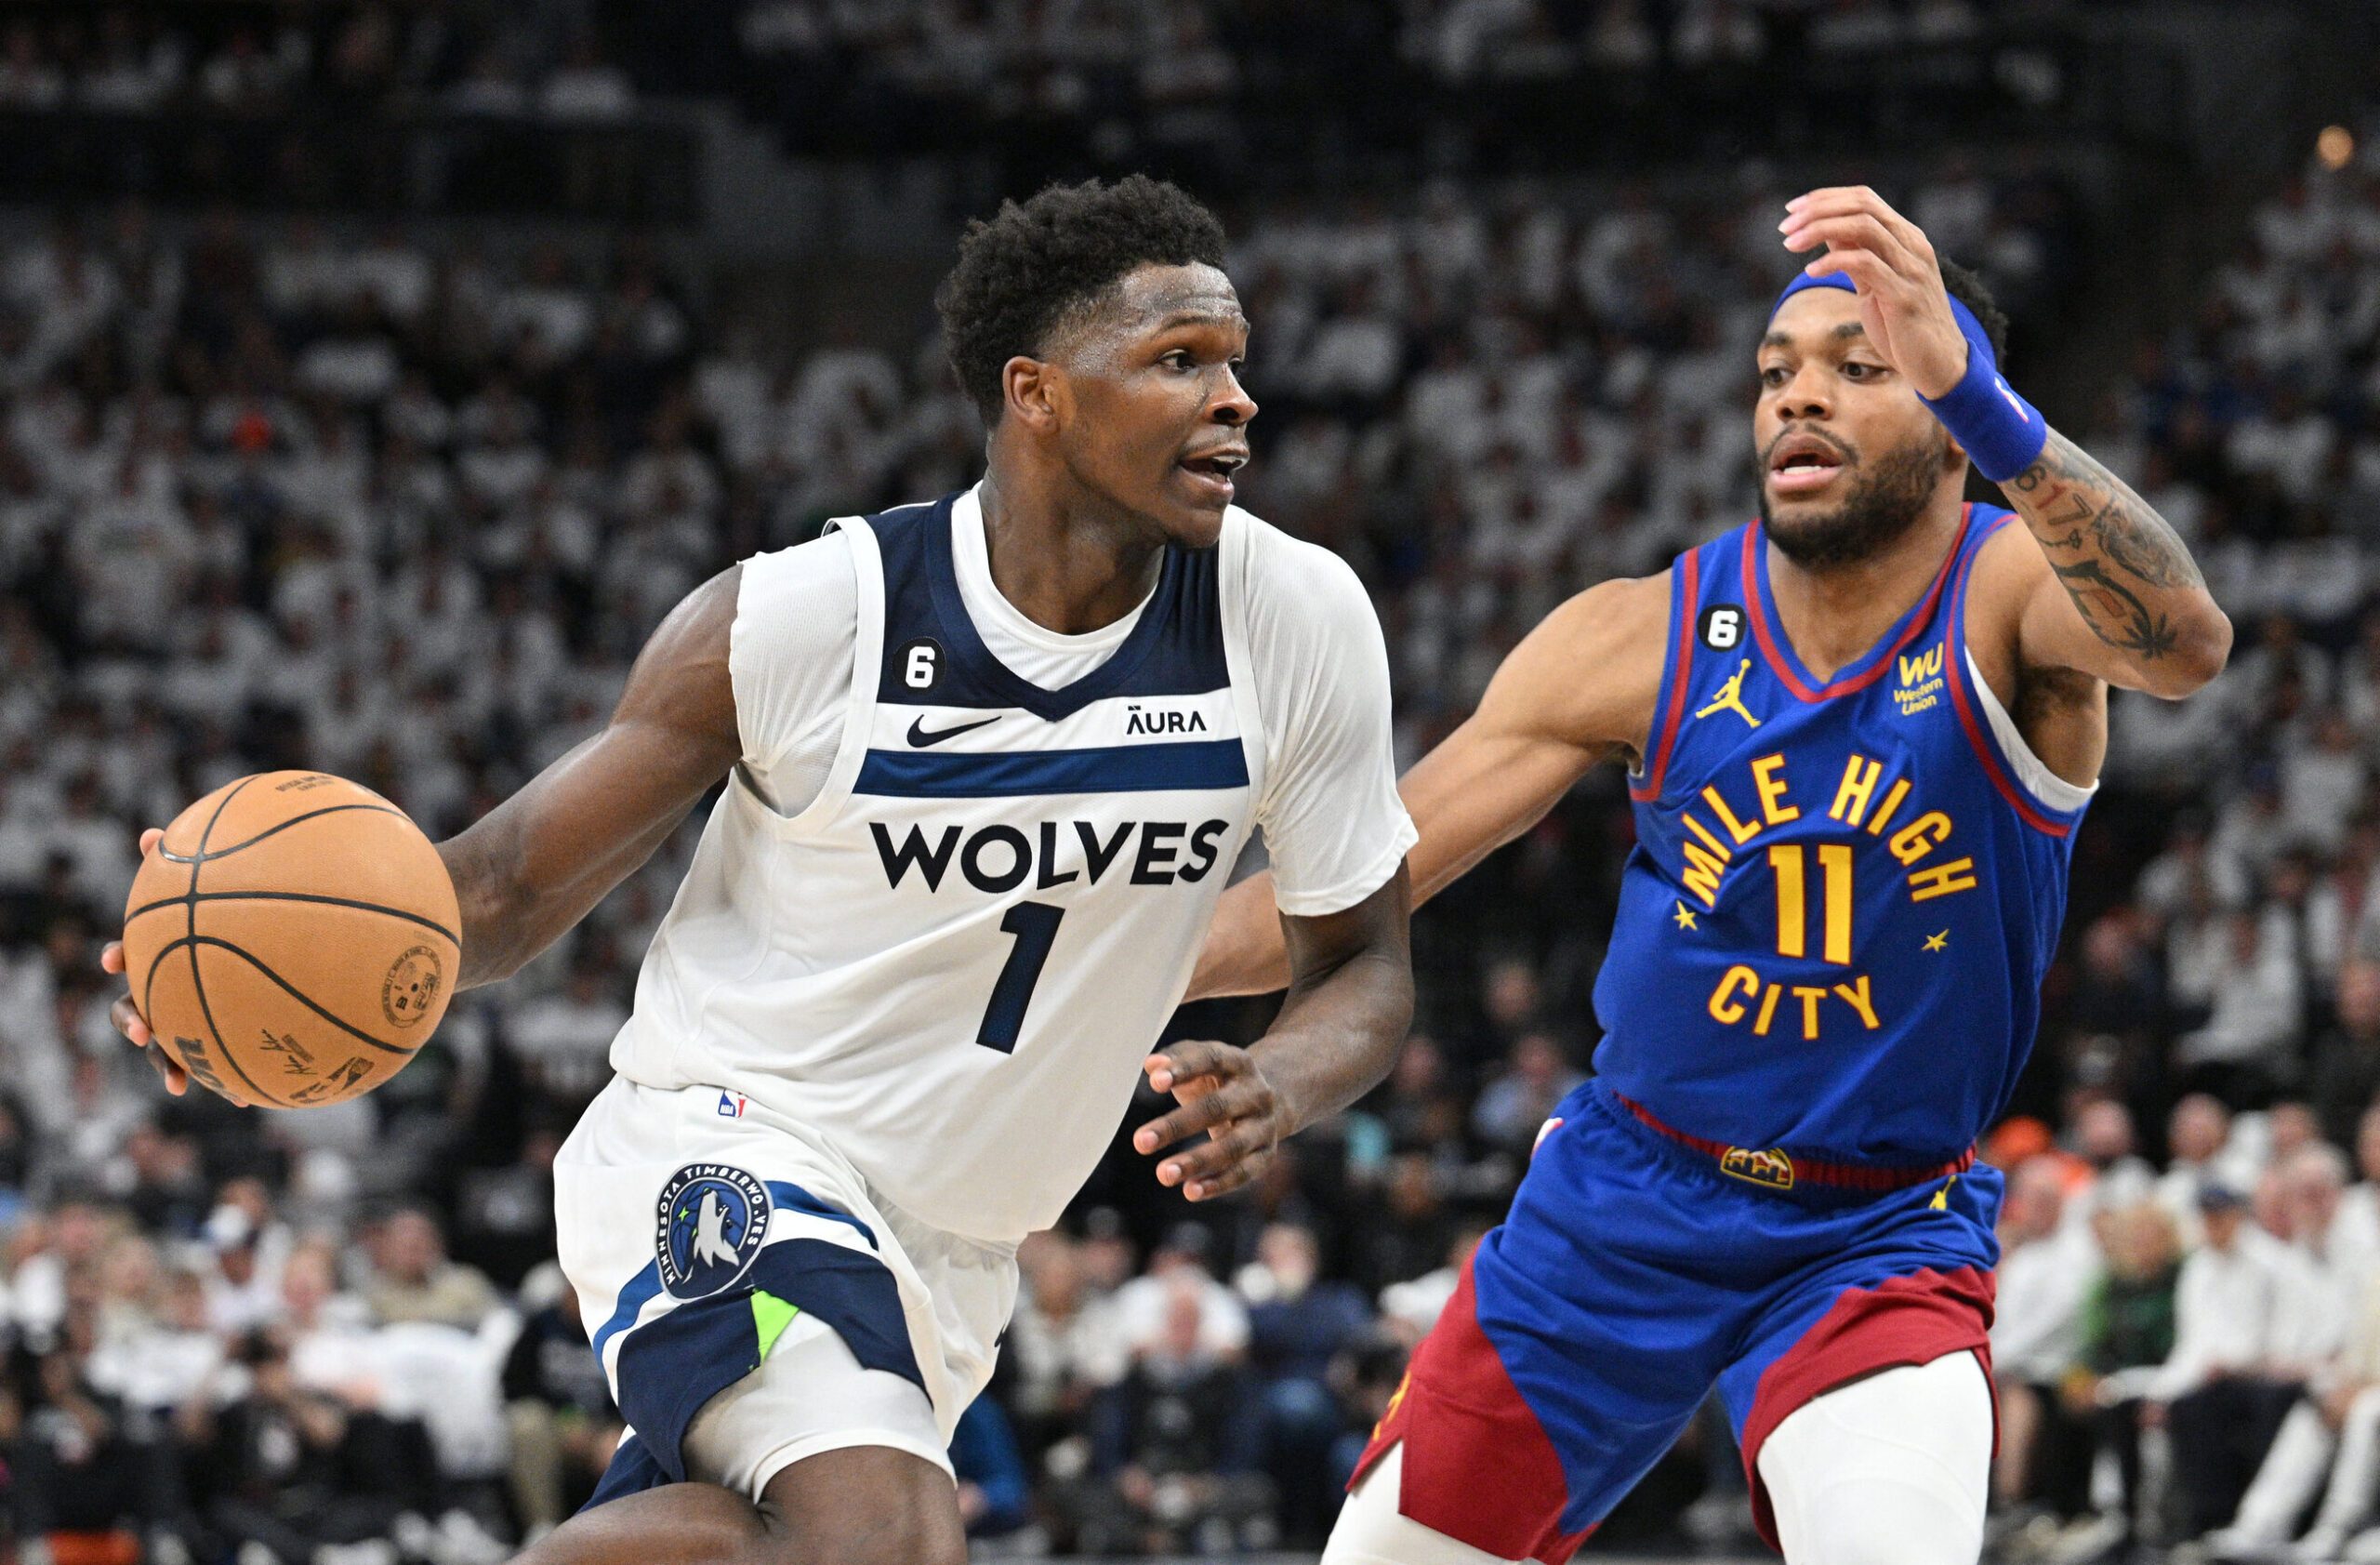 Timberwolves star Anthony Edwards cited for assault